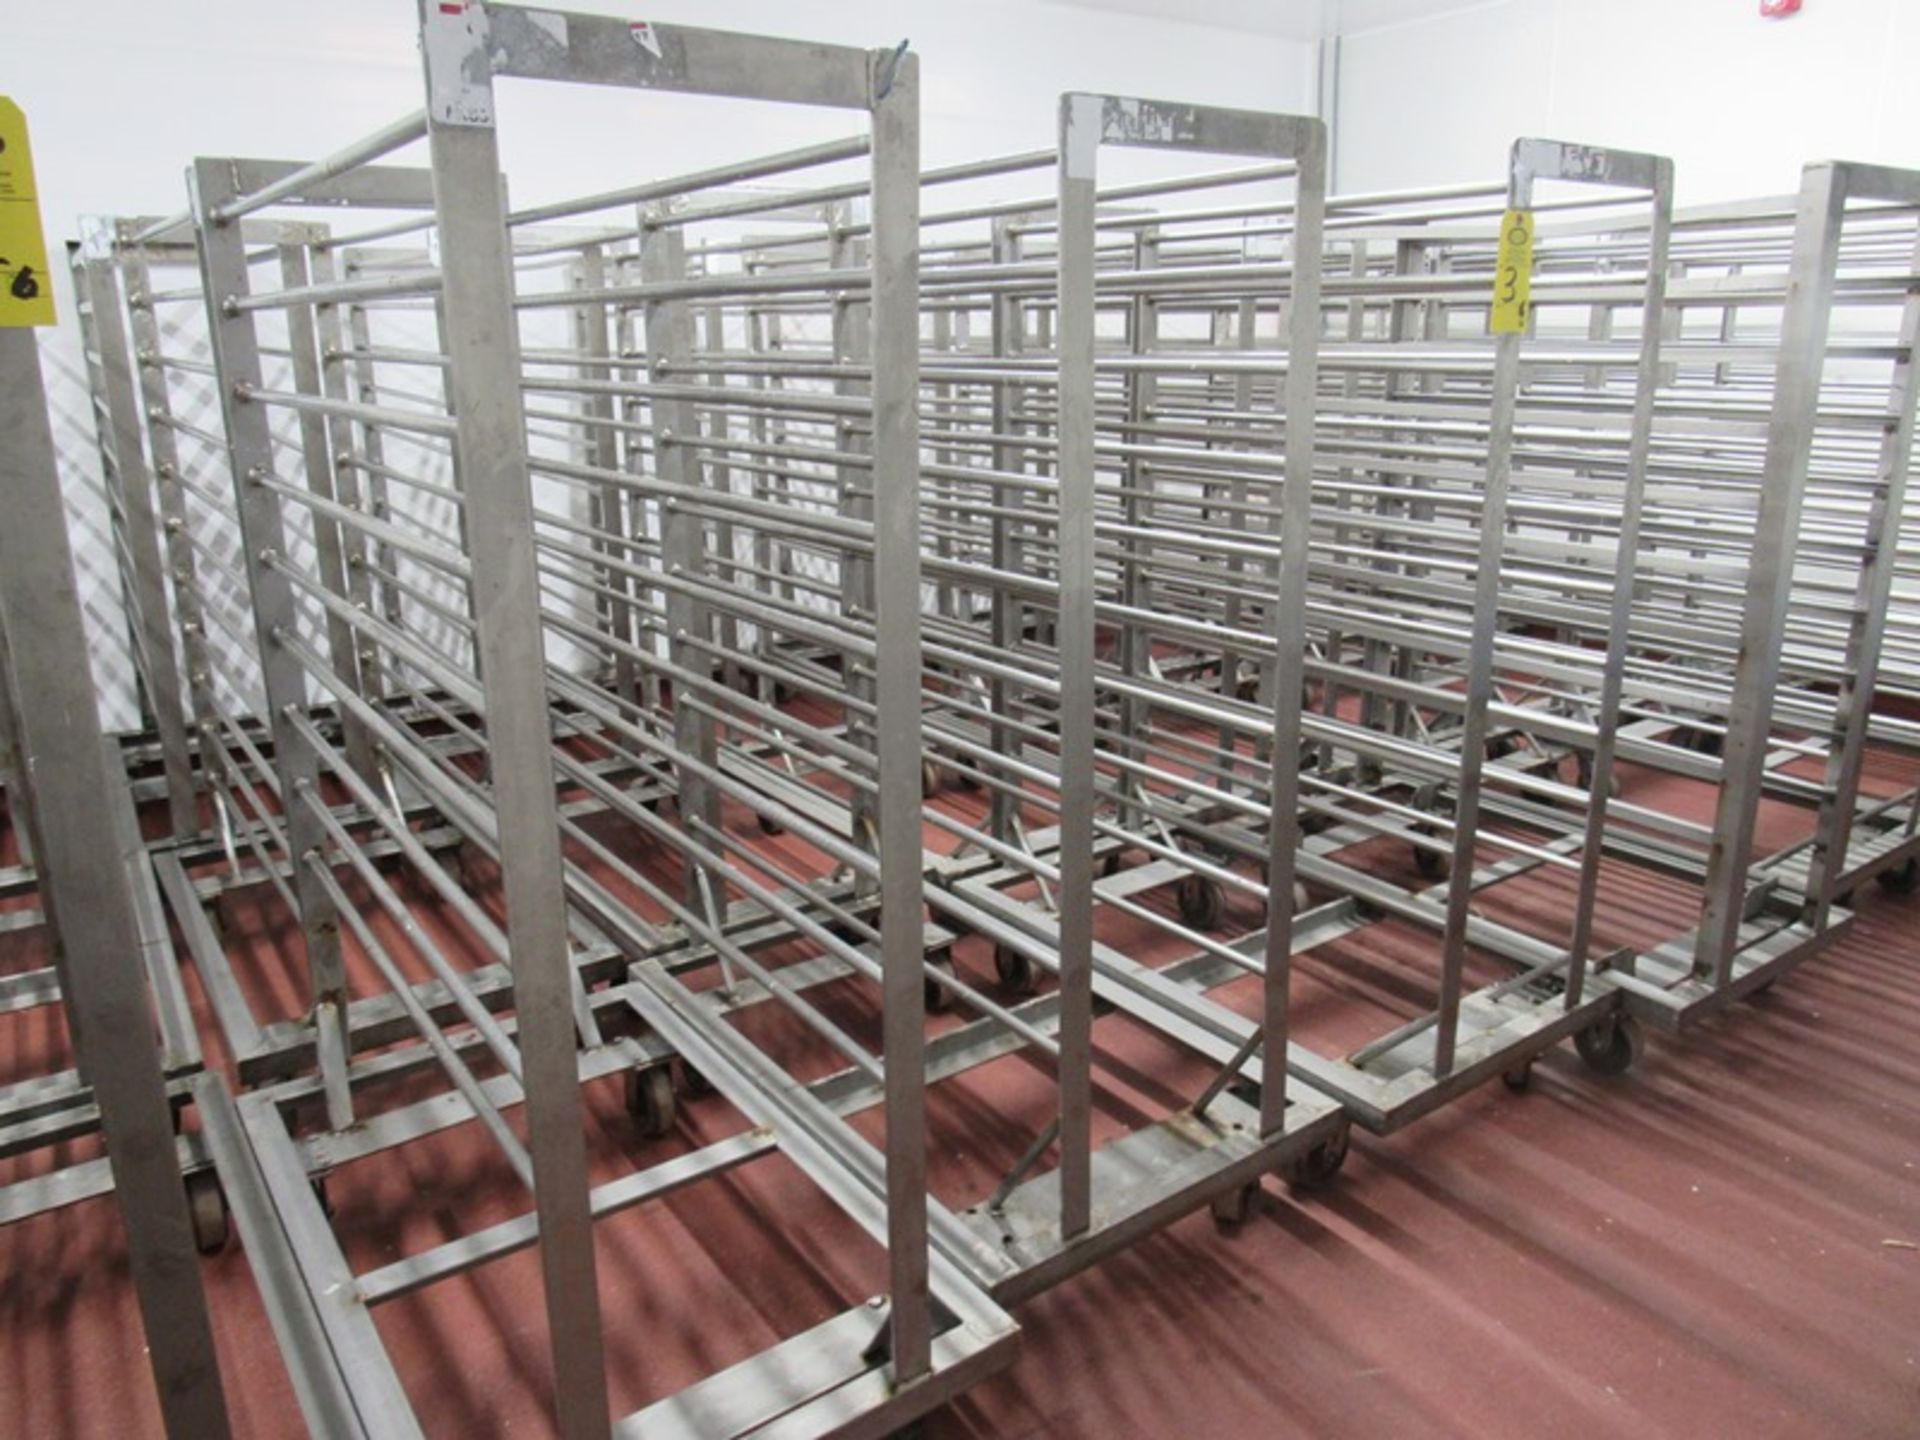 Stainless Steel Portable Racks, 27 1/2" W X 46" L X 65" Tall, 11 spaces, 4" apart (Required - Image 3 of 3